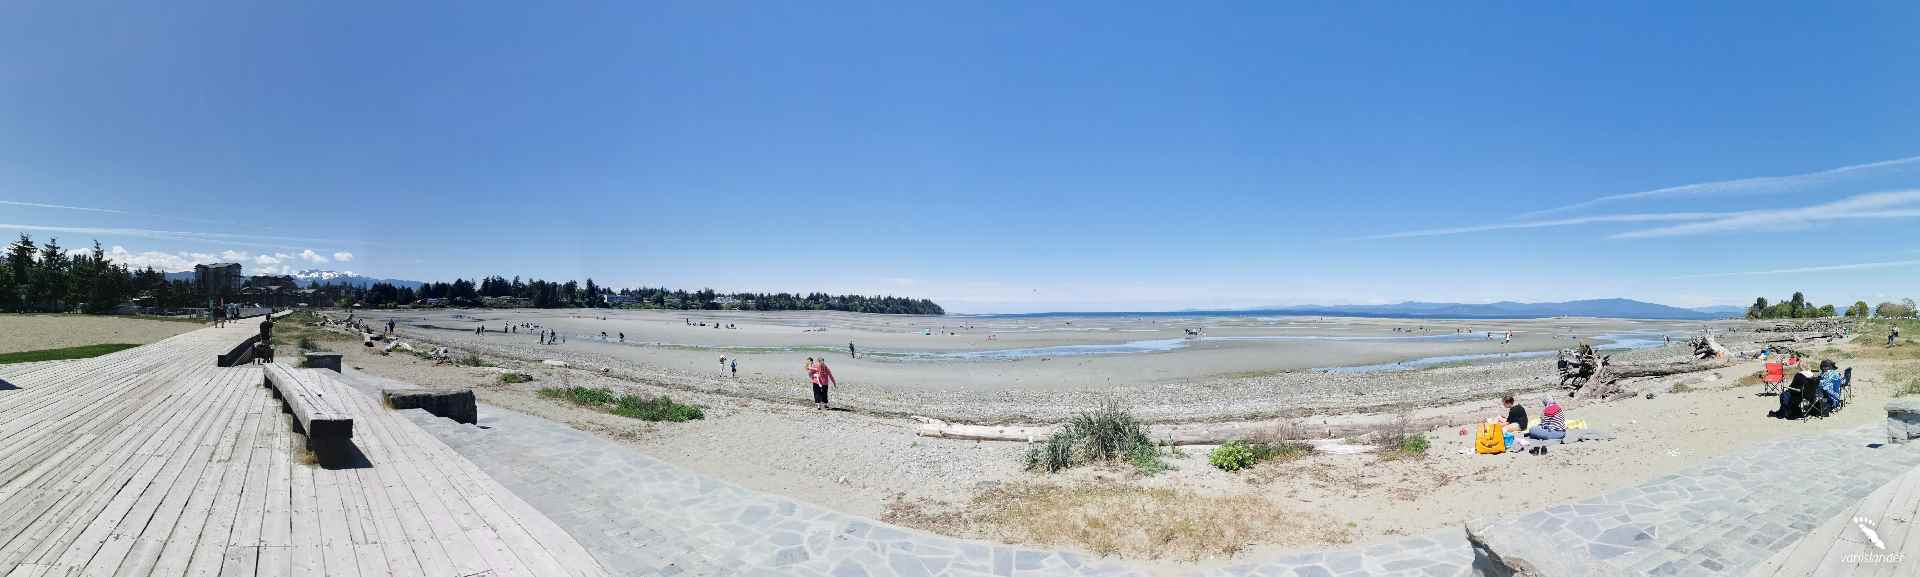 Wide photo of beachside in Parksville Community Beach, Vancouver island